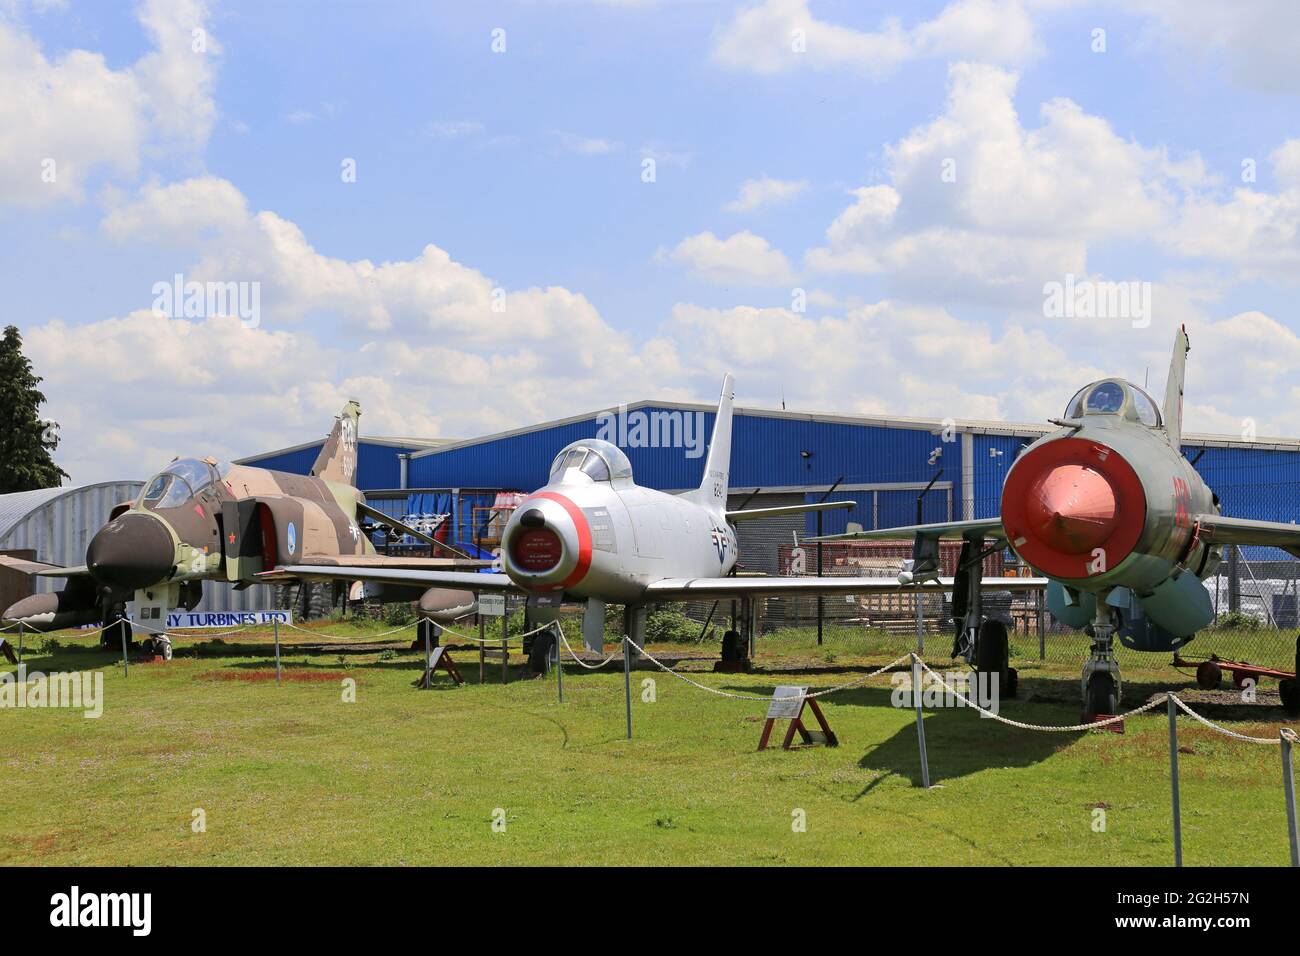 McDonnell Phantom, North American Sabre and Mikoyan-Gurevich MiG-21, Midland Air Museum, Coventry Airport, Baginton, Warwickshire, England, UK, Europe Stock Photo